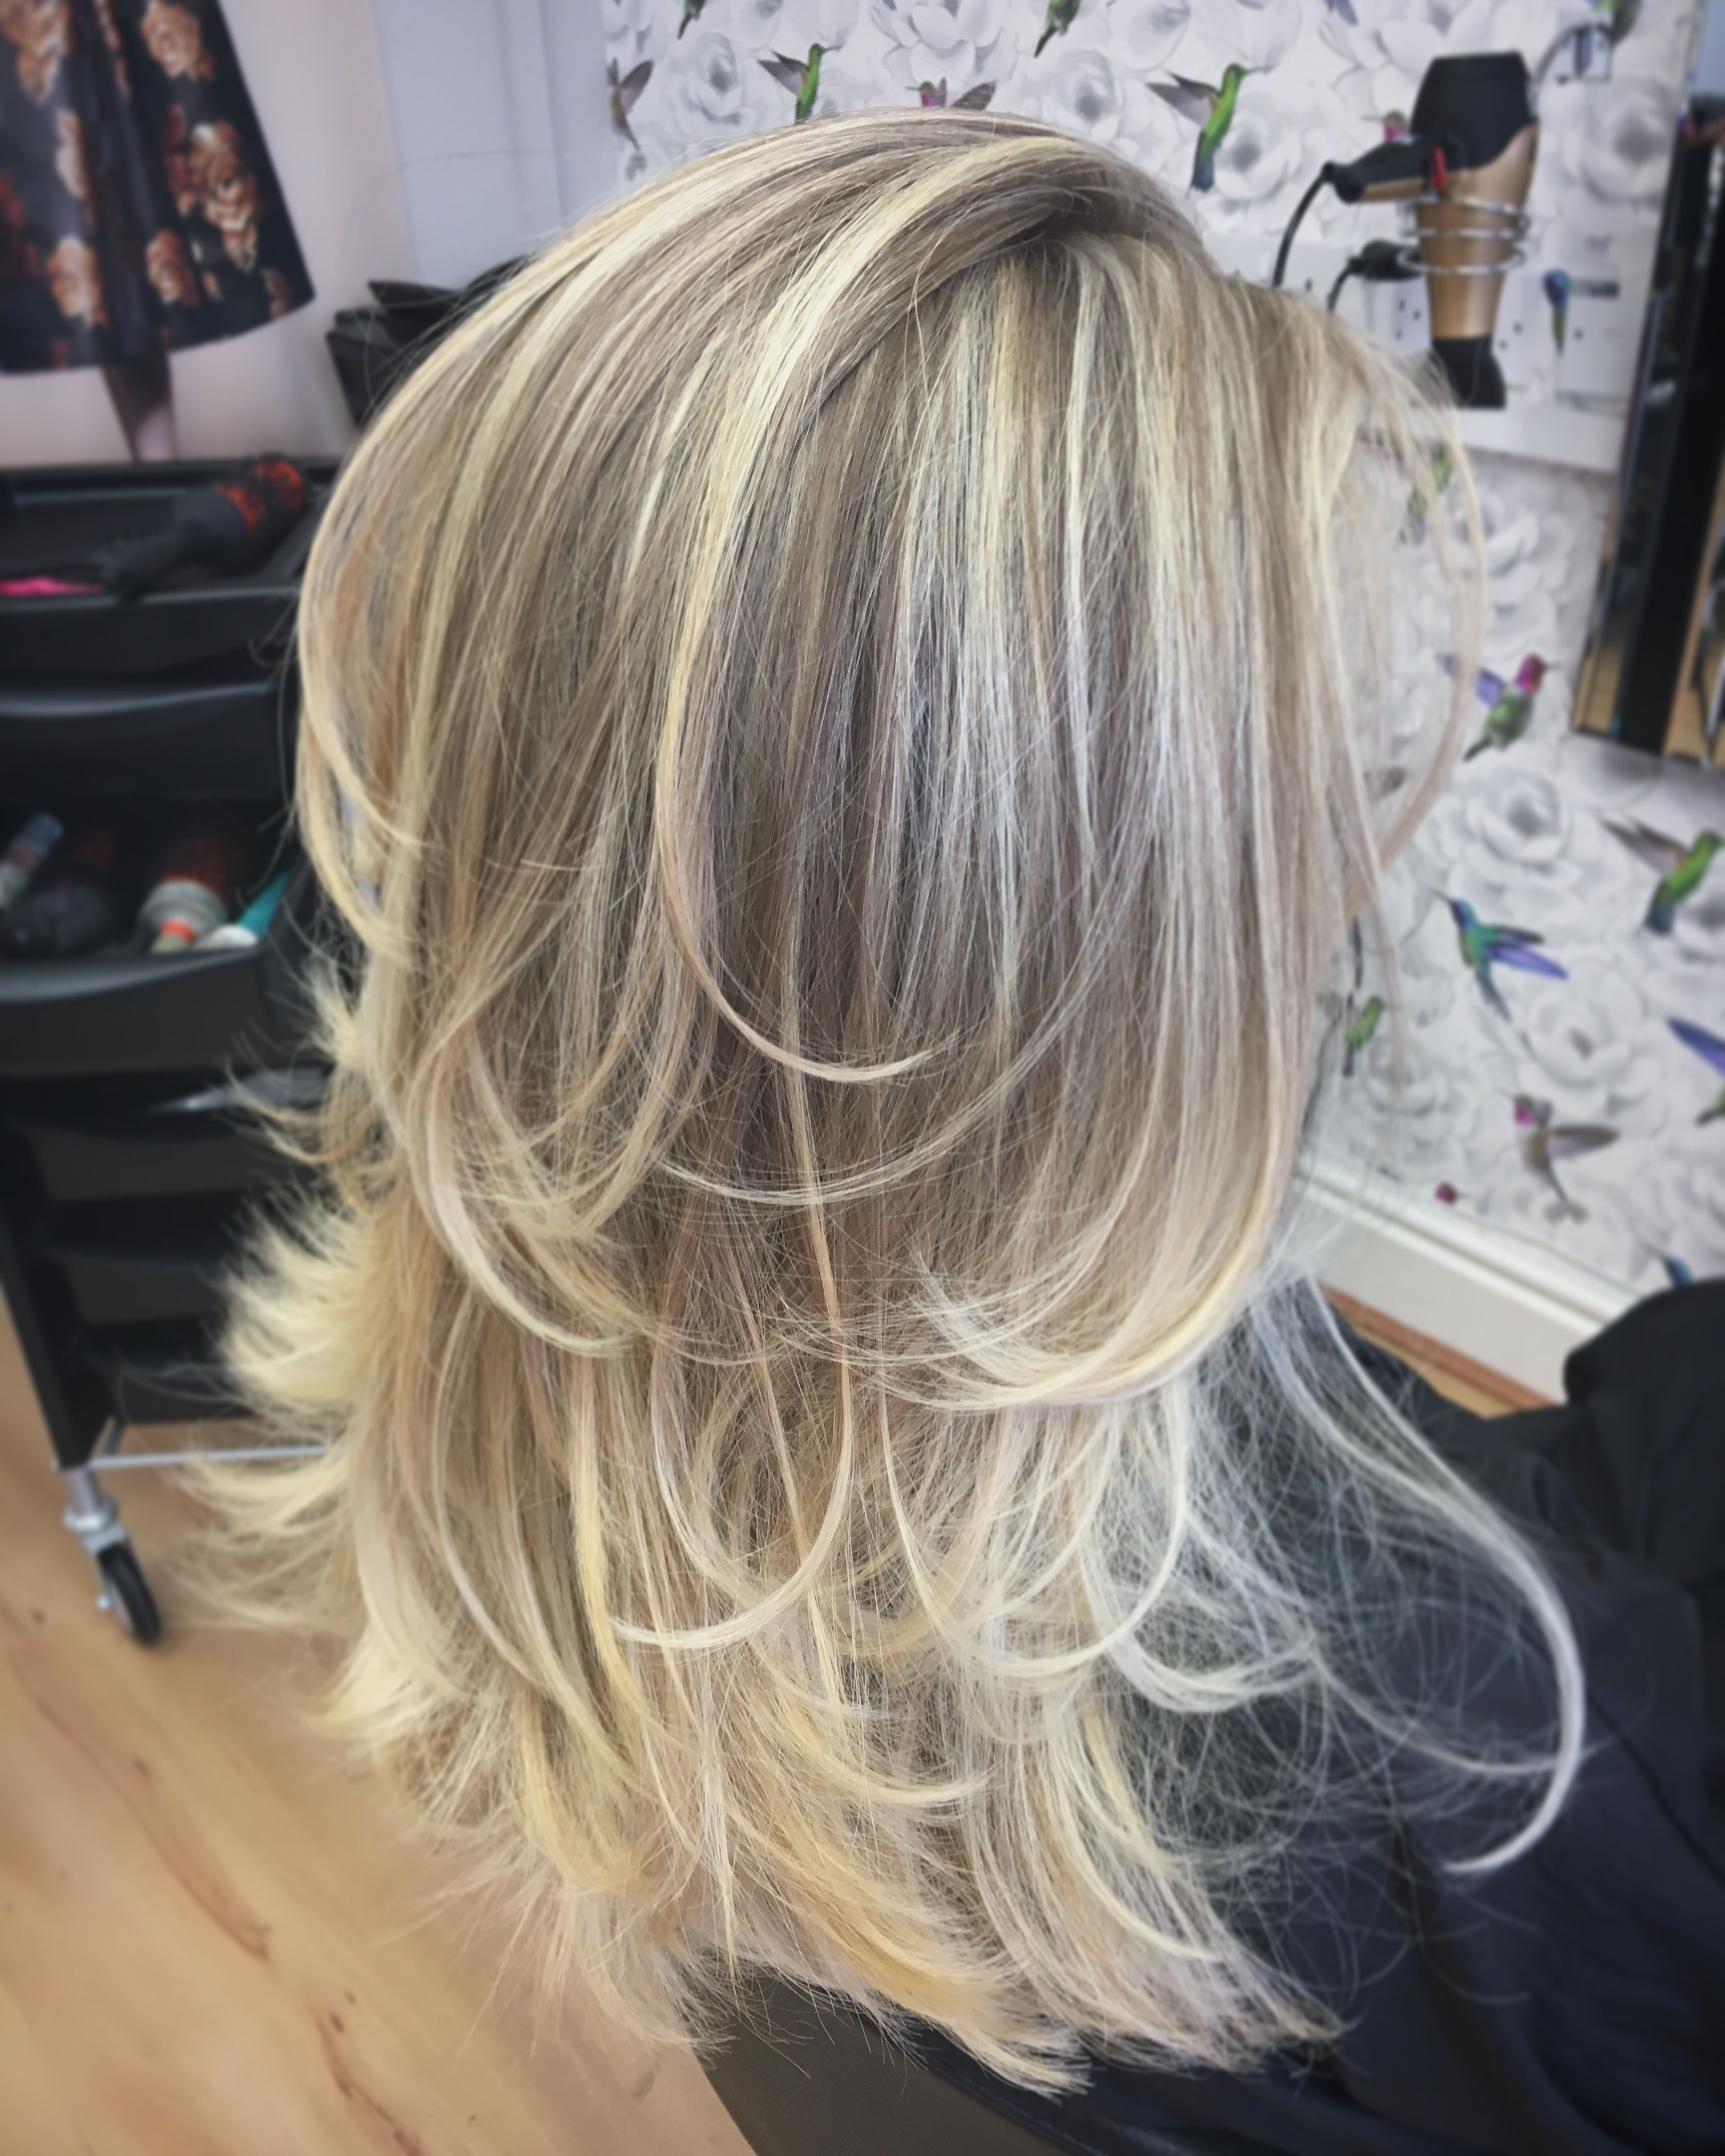 Long Layers, Blonde Balayage, Blonde Highlights, Ash Blonde, Layers, Ombré  | Long Hair Styles, Long Layered Hair, Blonde Balayage For Layers And Highlights (View 24 of 25)